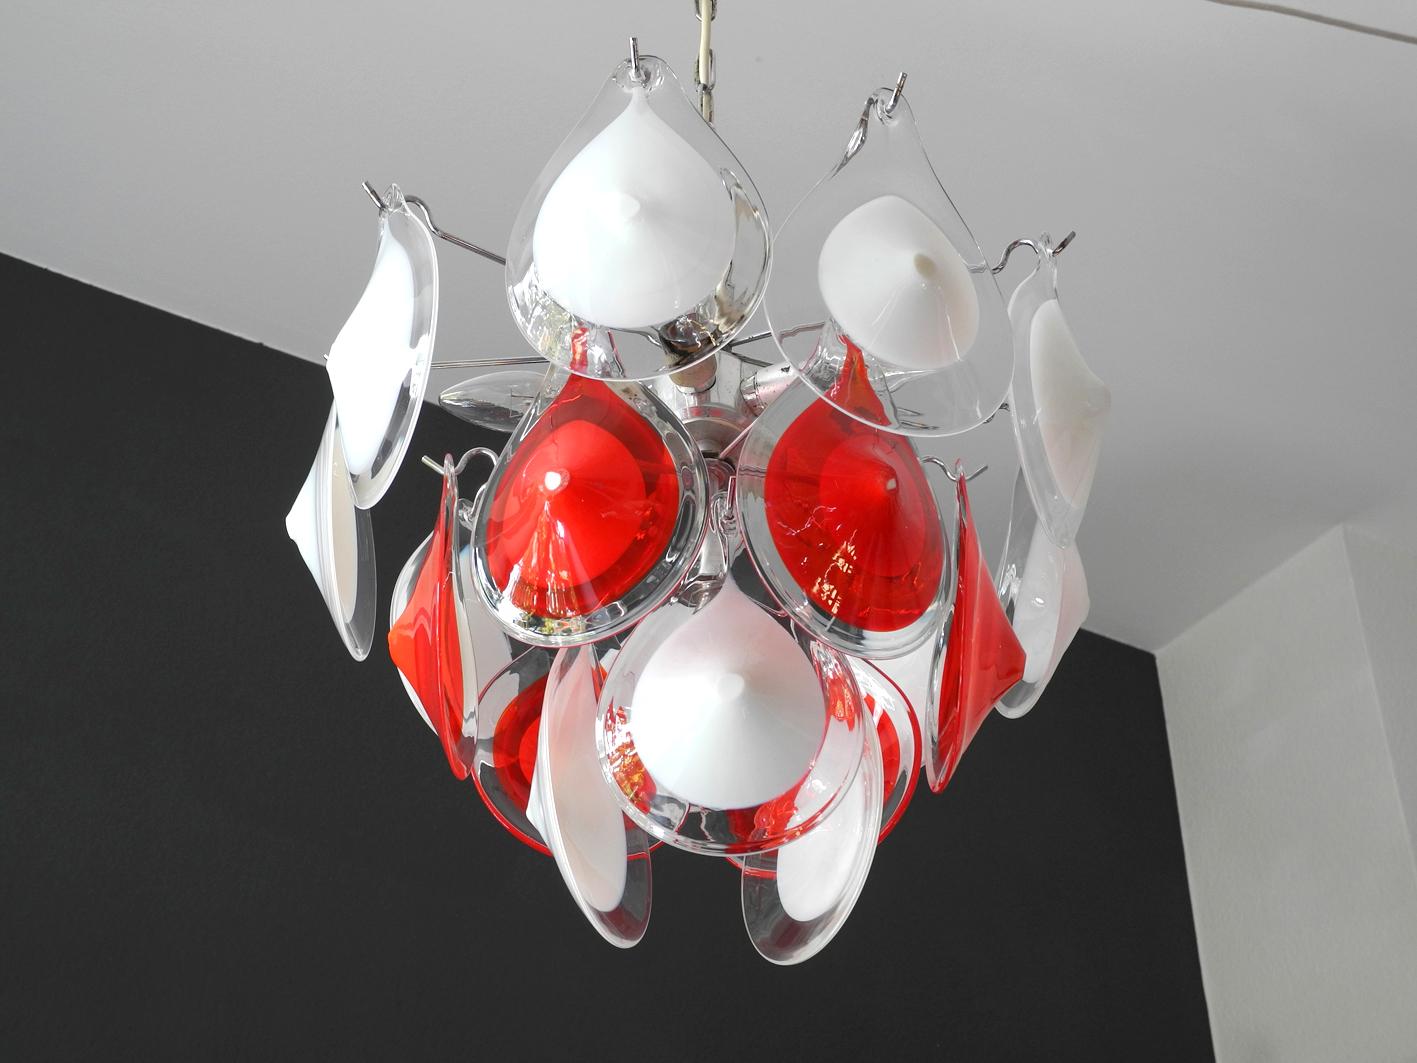 Beautiful original 1960s Vistosi Murano ceiling chandelier.
Design Gino Vistosi for Vetreria Vistosi. 18 red and white glasses, bulging drop shaped and outside transparent.
Very high quality lamp for a great charming lighting for any room.
Whole